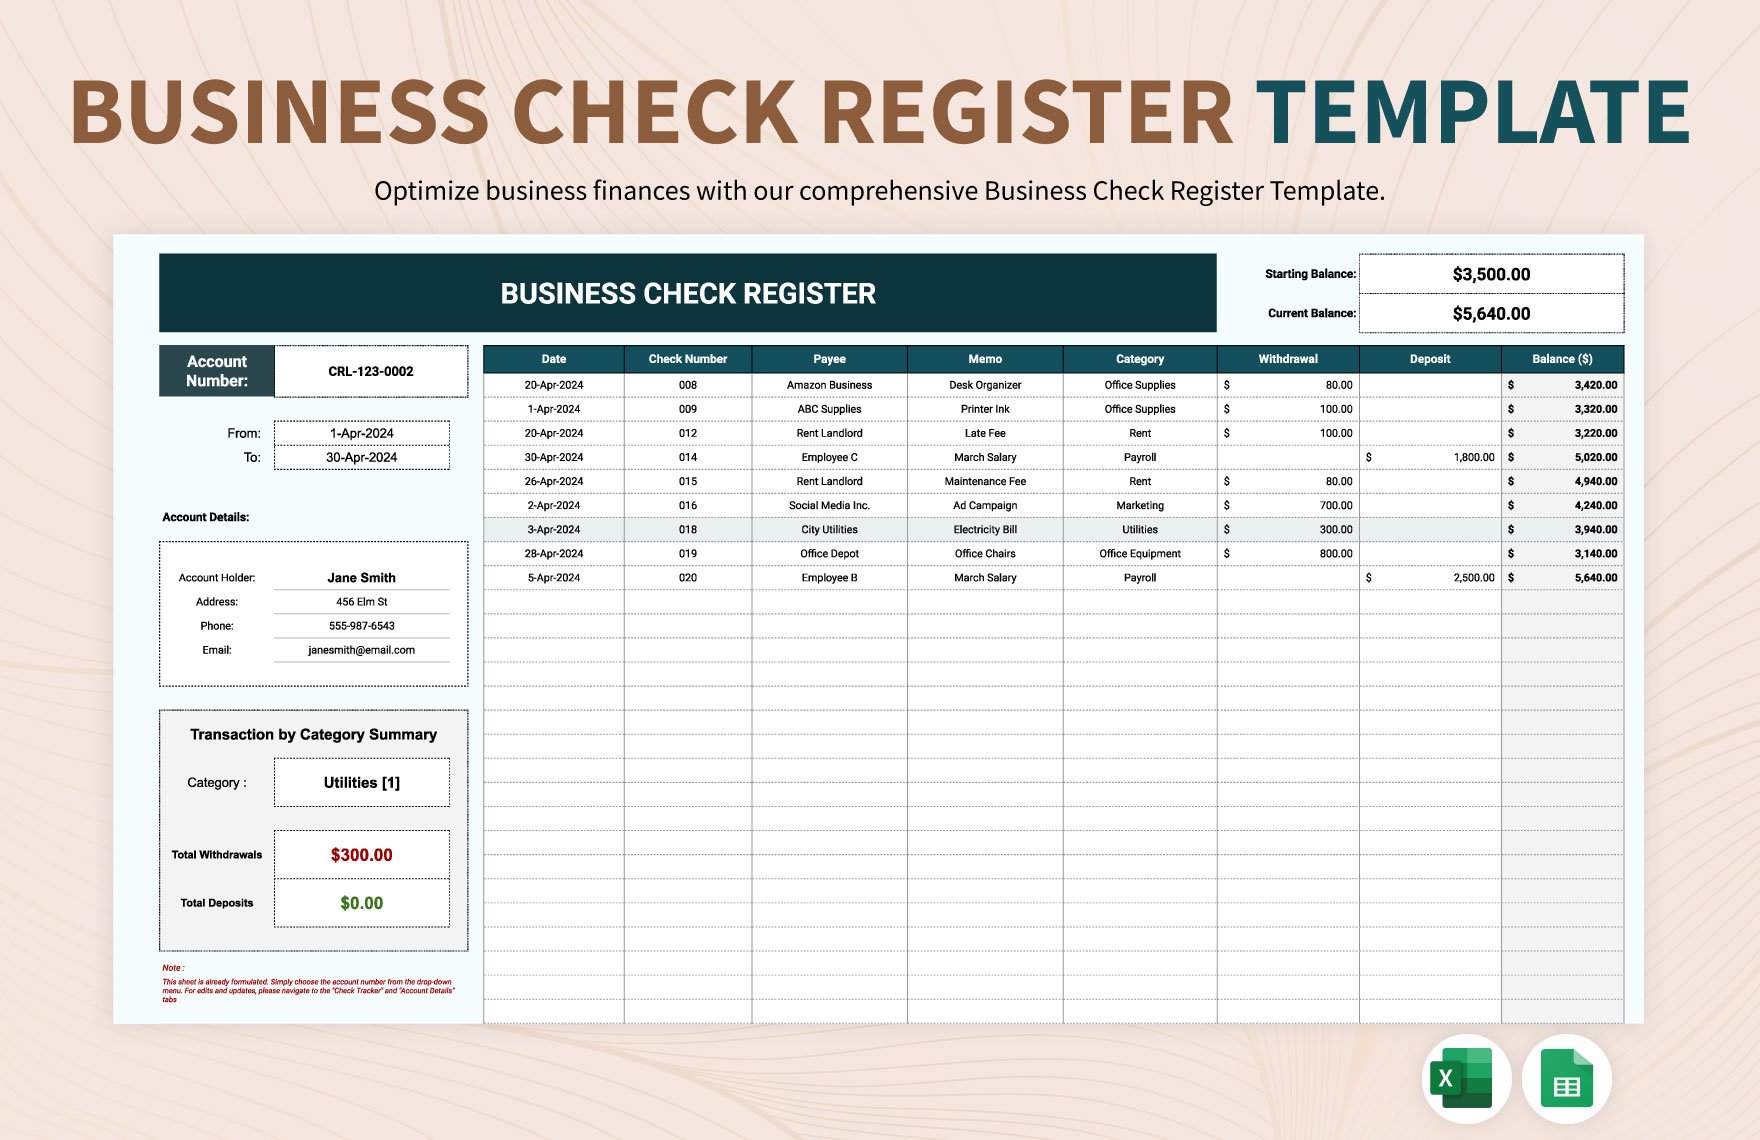 Business Check Register Template in Excel, Google Sheets